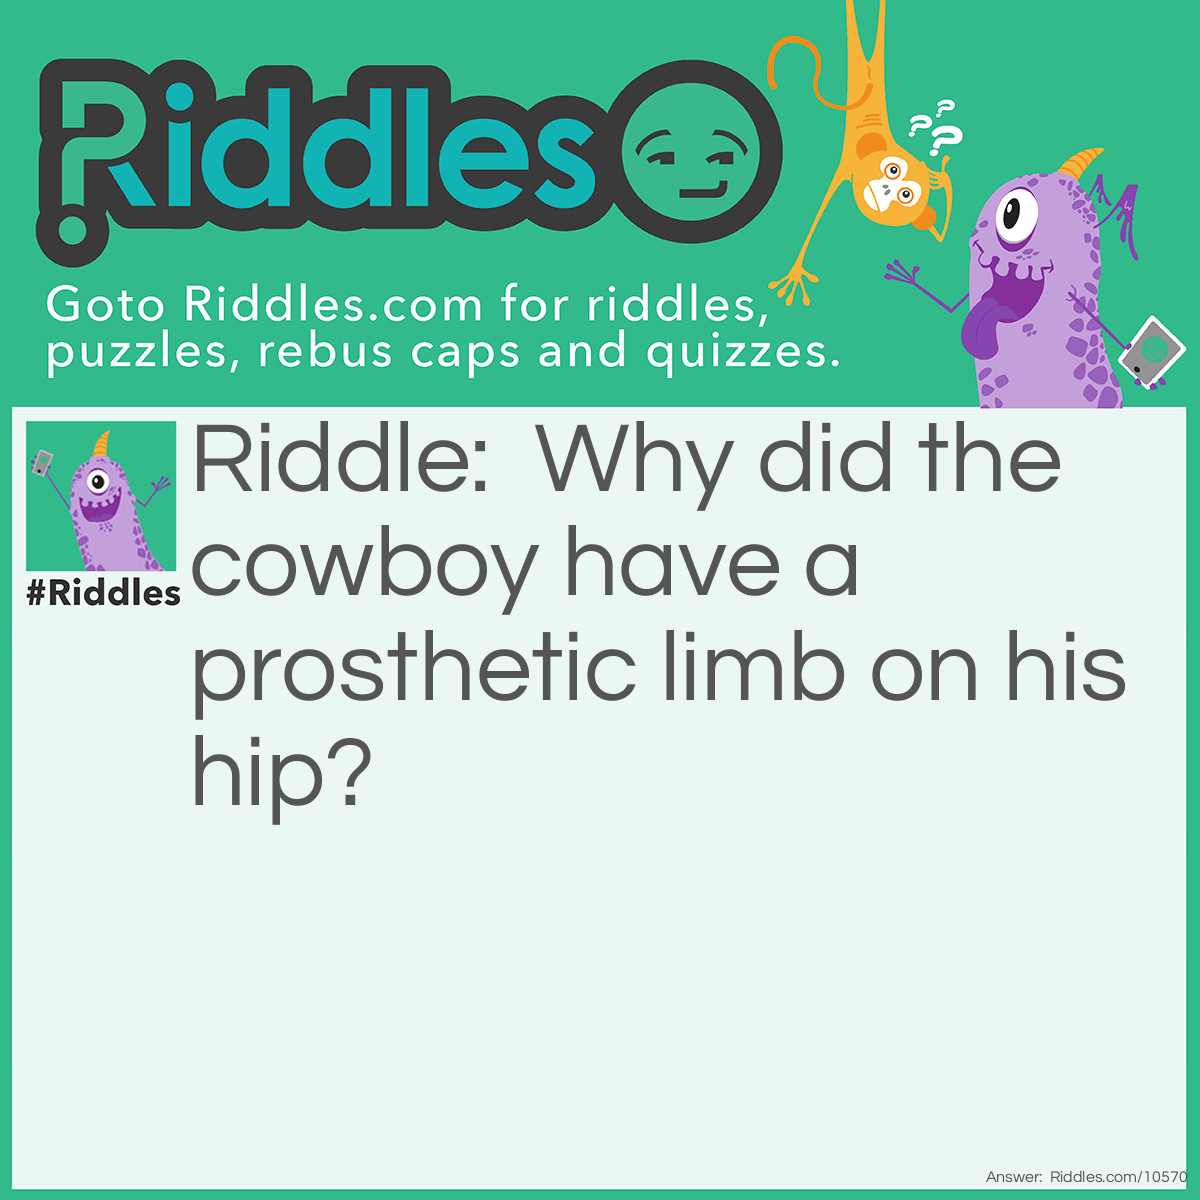 Riddle: Why did the cowboy have a prosthetic limb on his hip? Answer: In case he needed a spare arm.